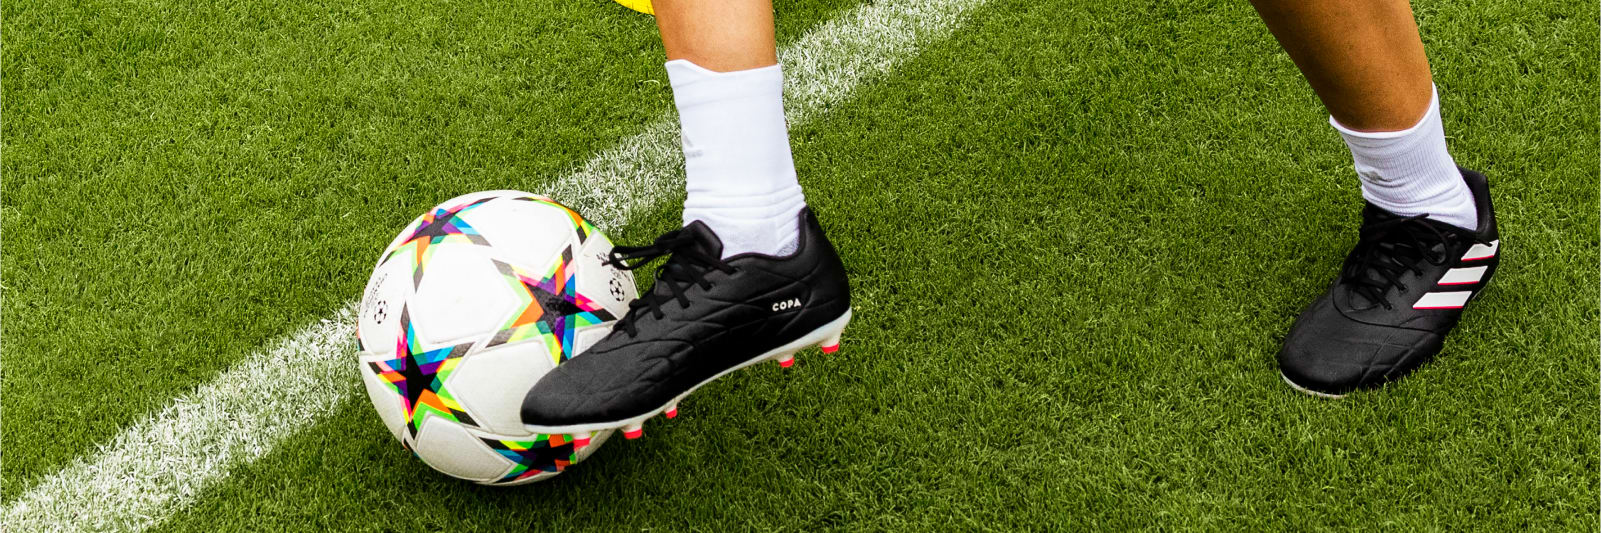 The best astro turf football boots you can buy in 2023